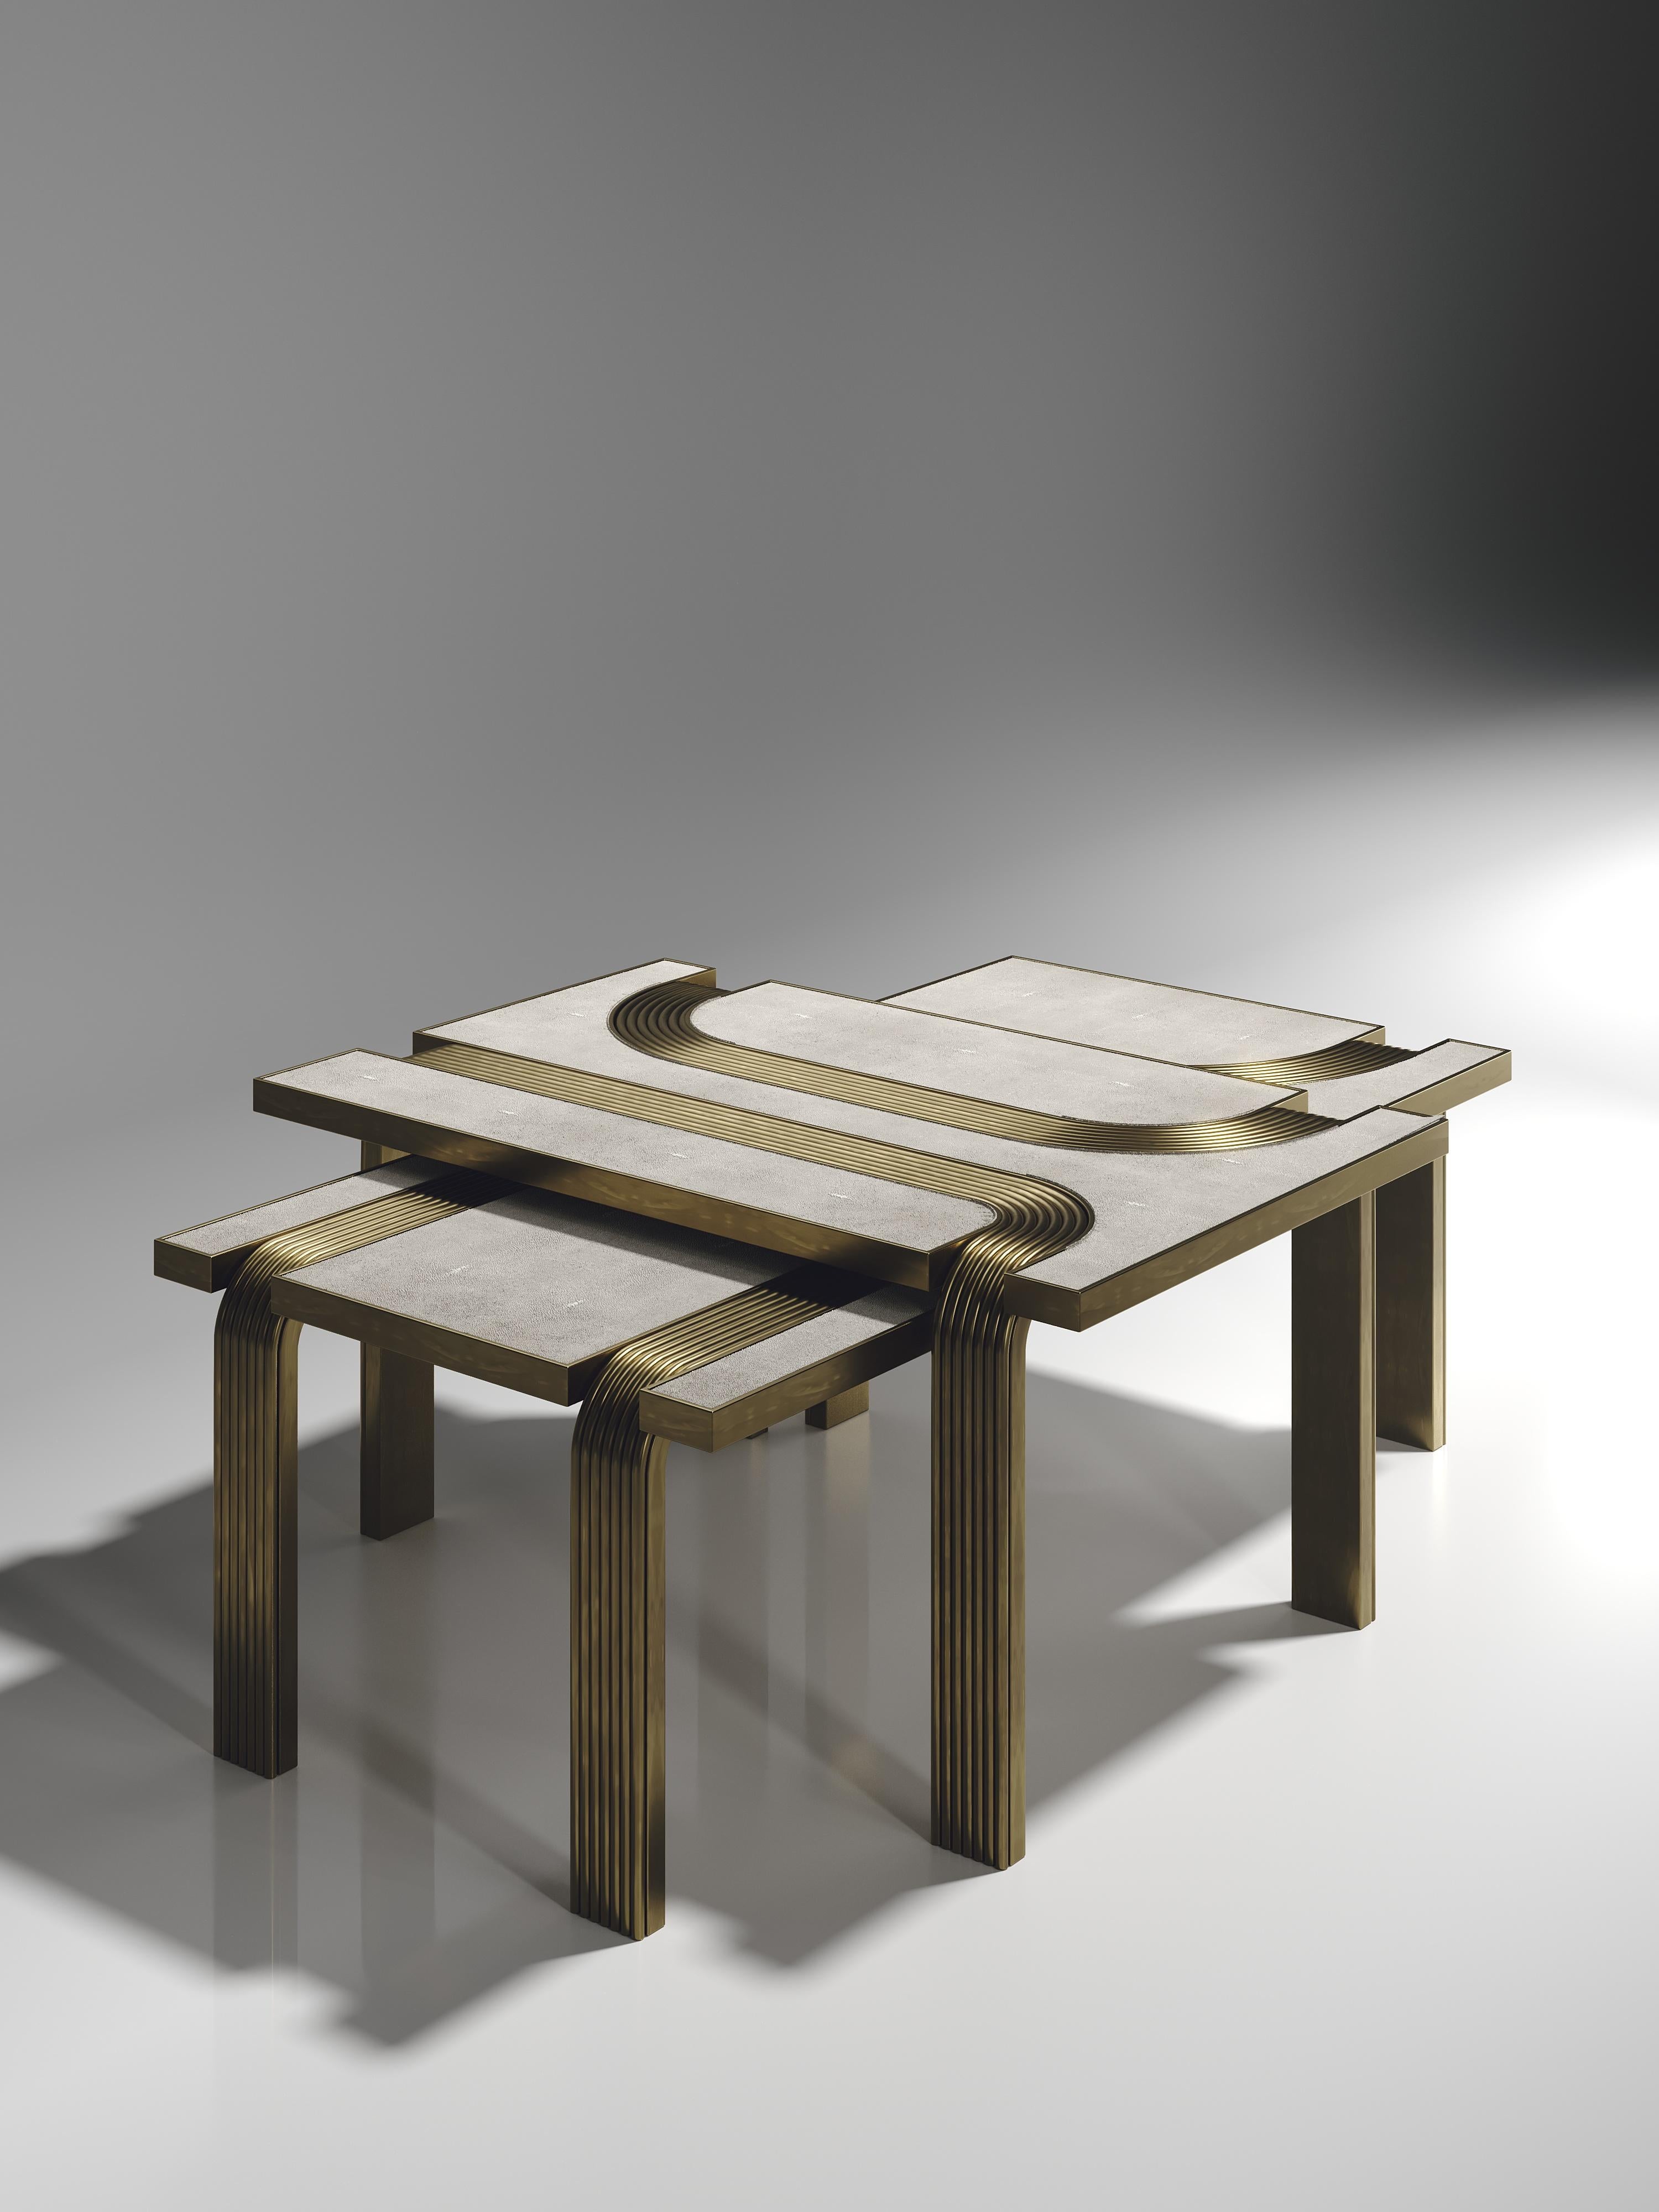 The Set of 2 Licol nesting coffee tables by R & Y Augousti in cream shagreen with bronze-patina brass details explore the brand's iconic DNA of bringing old world artisanal craft into a contemporary and utterly luxury feel. These tables nest